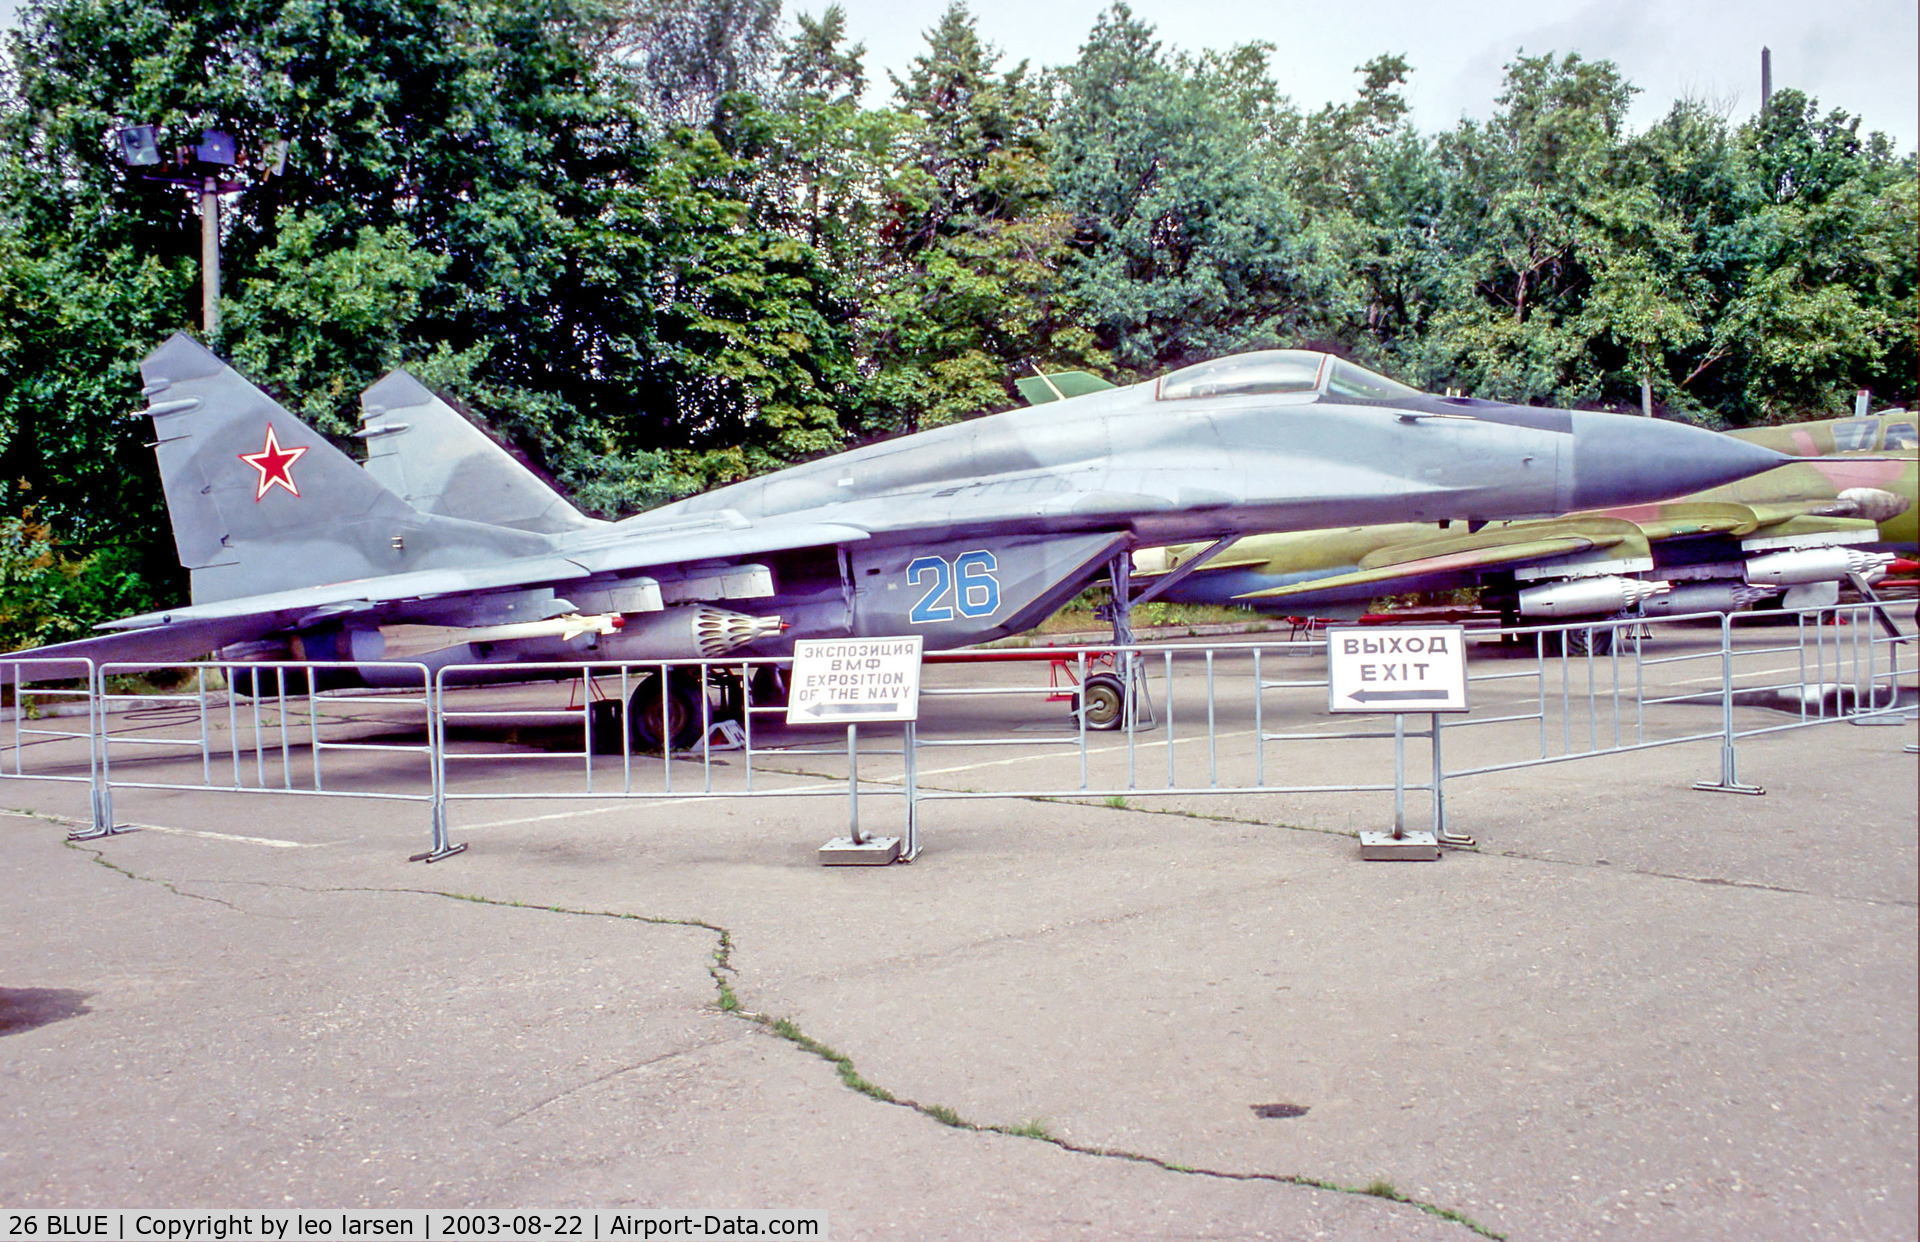 26 BLUE, Mikoyan-Gurevich MiG-29 C/N 29605560, Central Museum of the great patriotic war Moscow
22.8.03